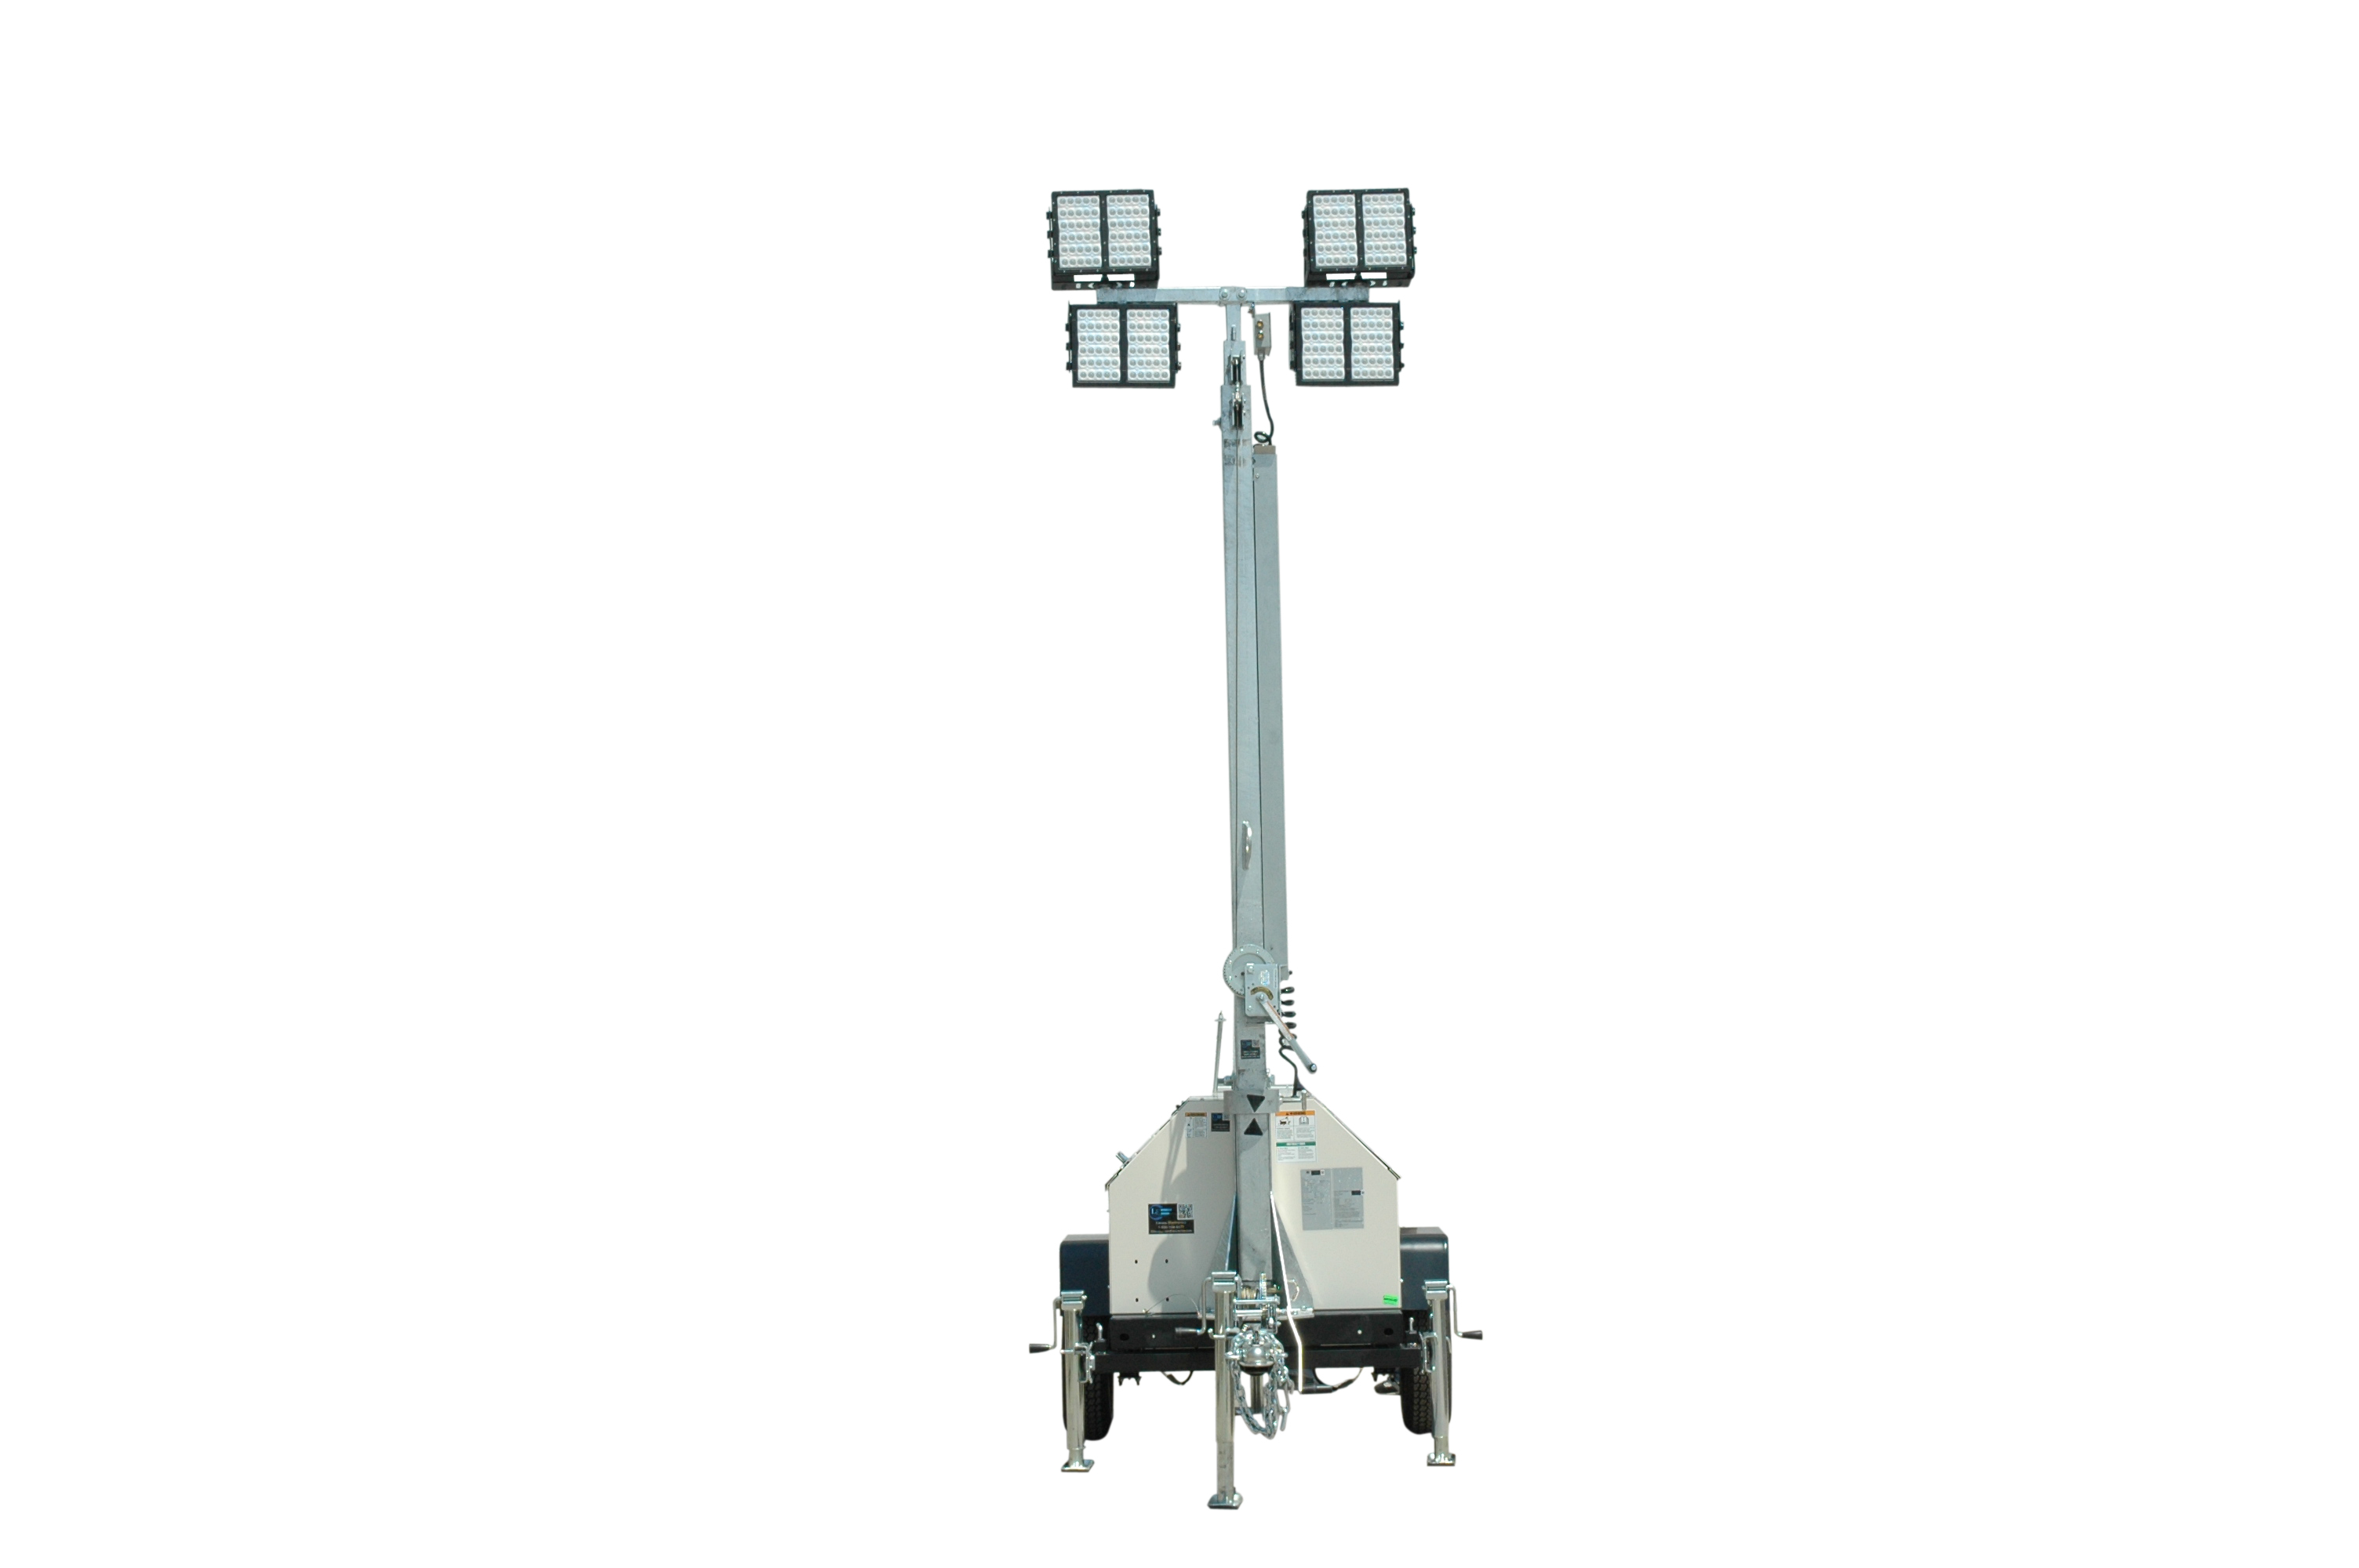 WCDE-4-4X300W-LED mobile light tower from Larson Electronics